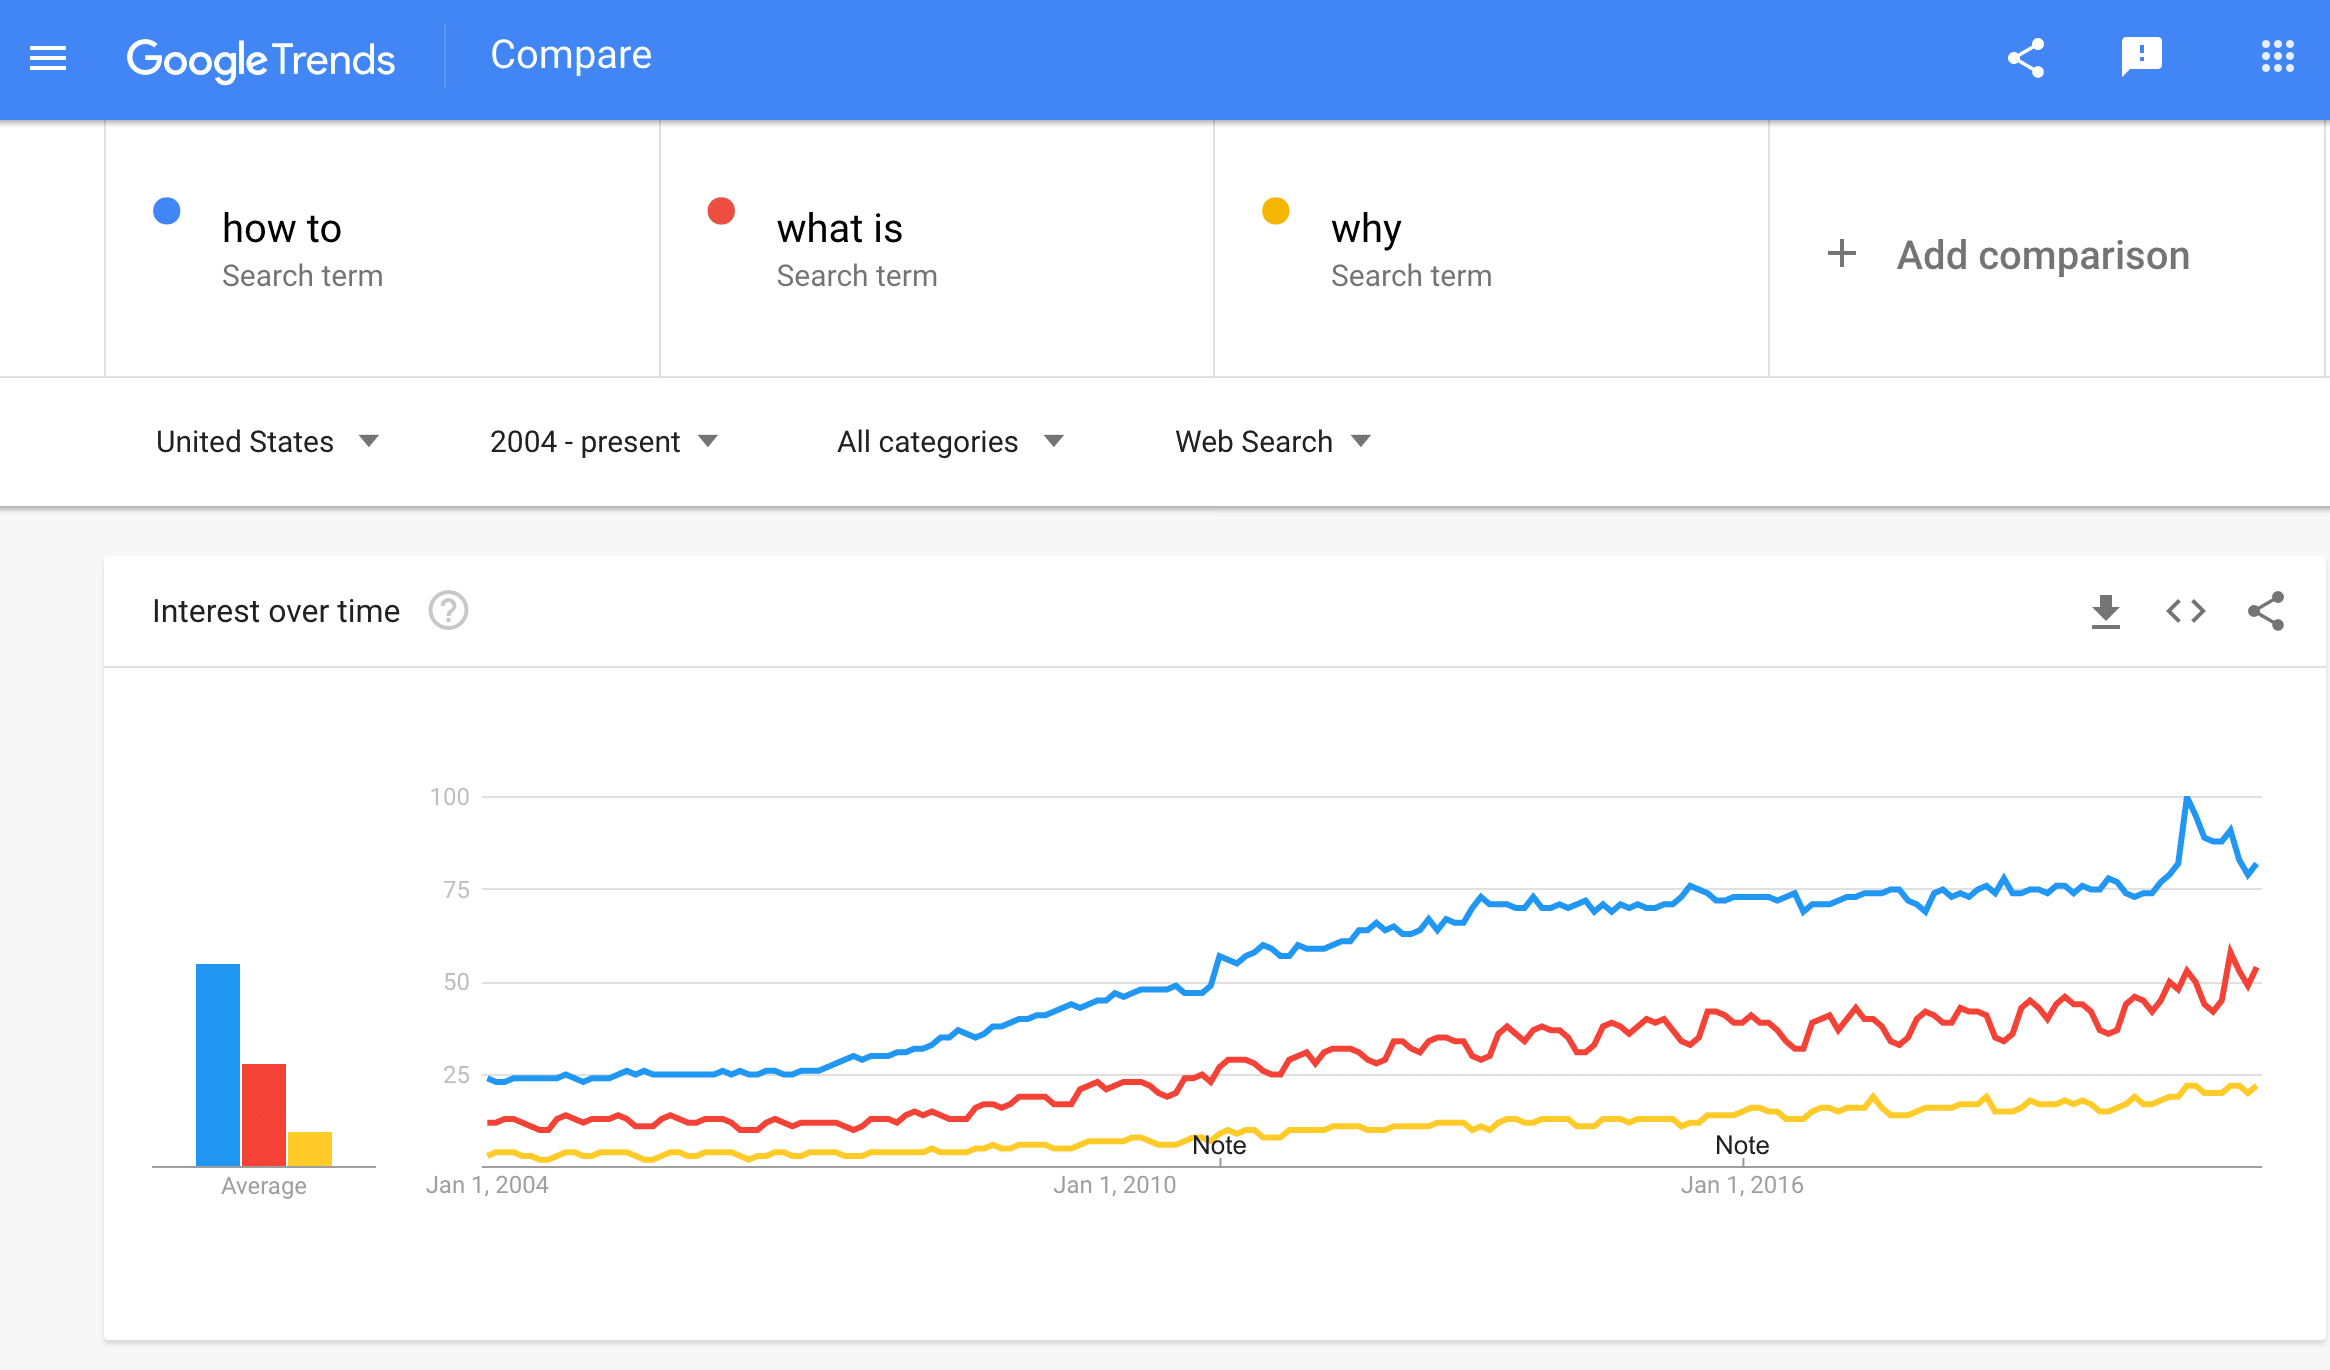 Google Trends how-to queries